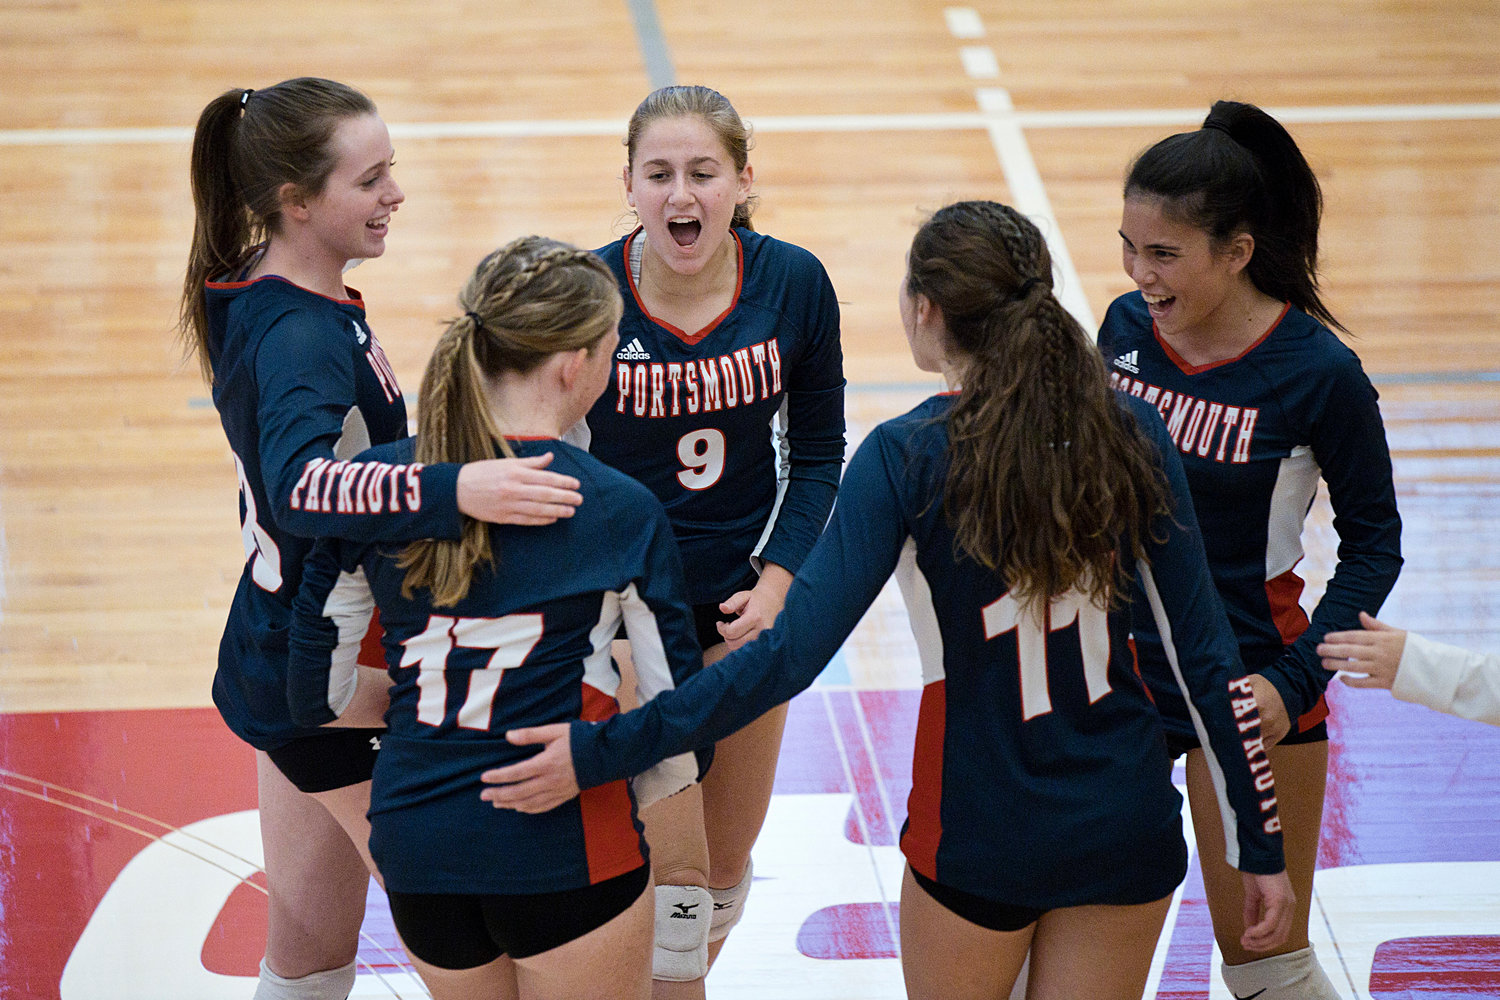 The Patriots celebrate a point during a close set against East Providence.